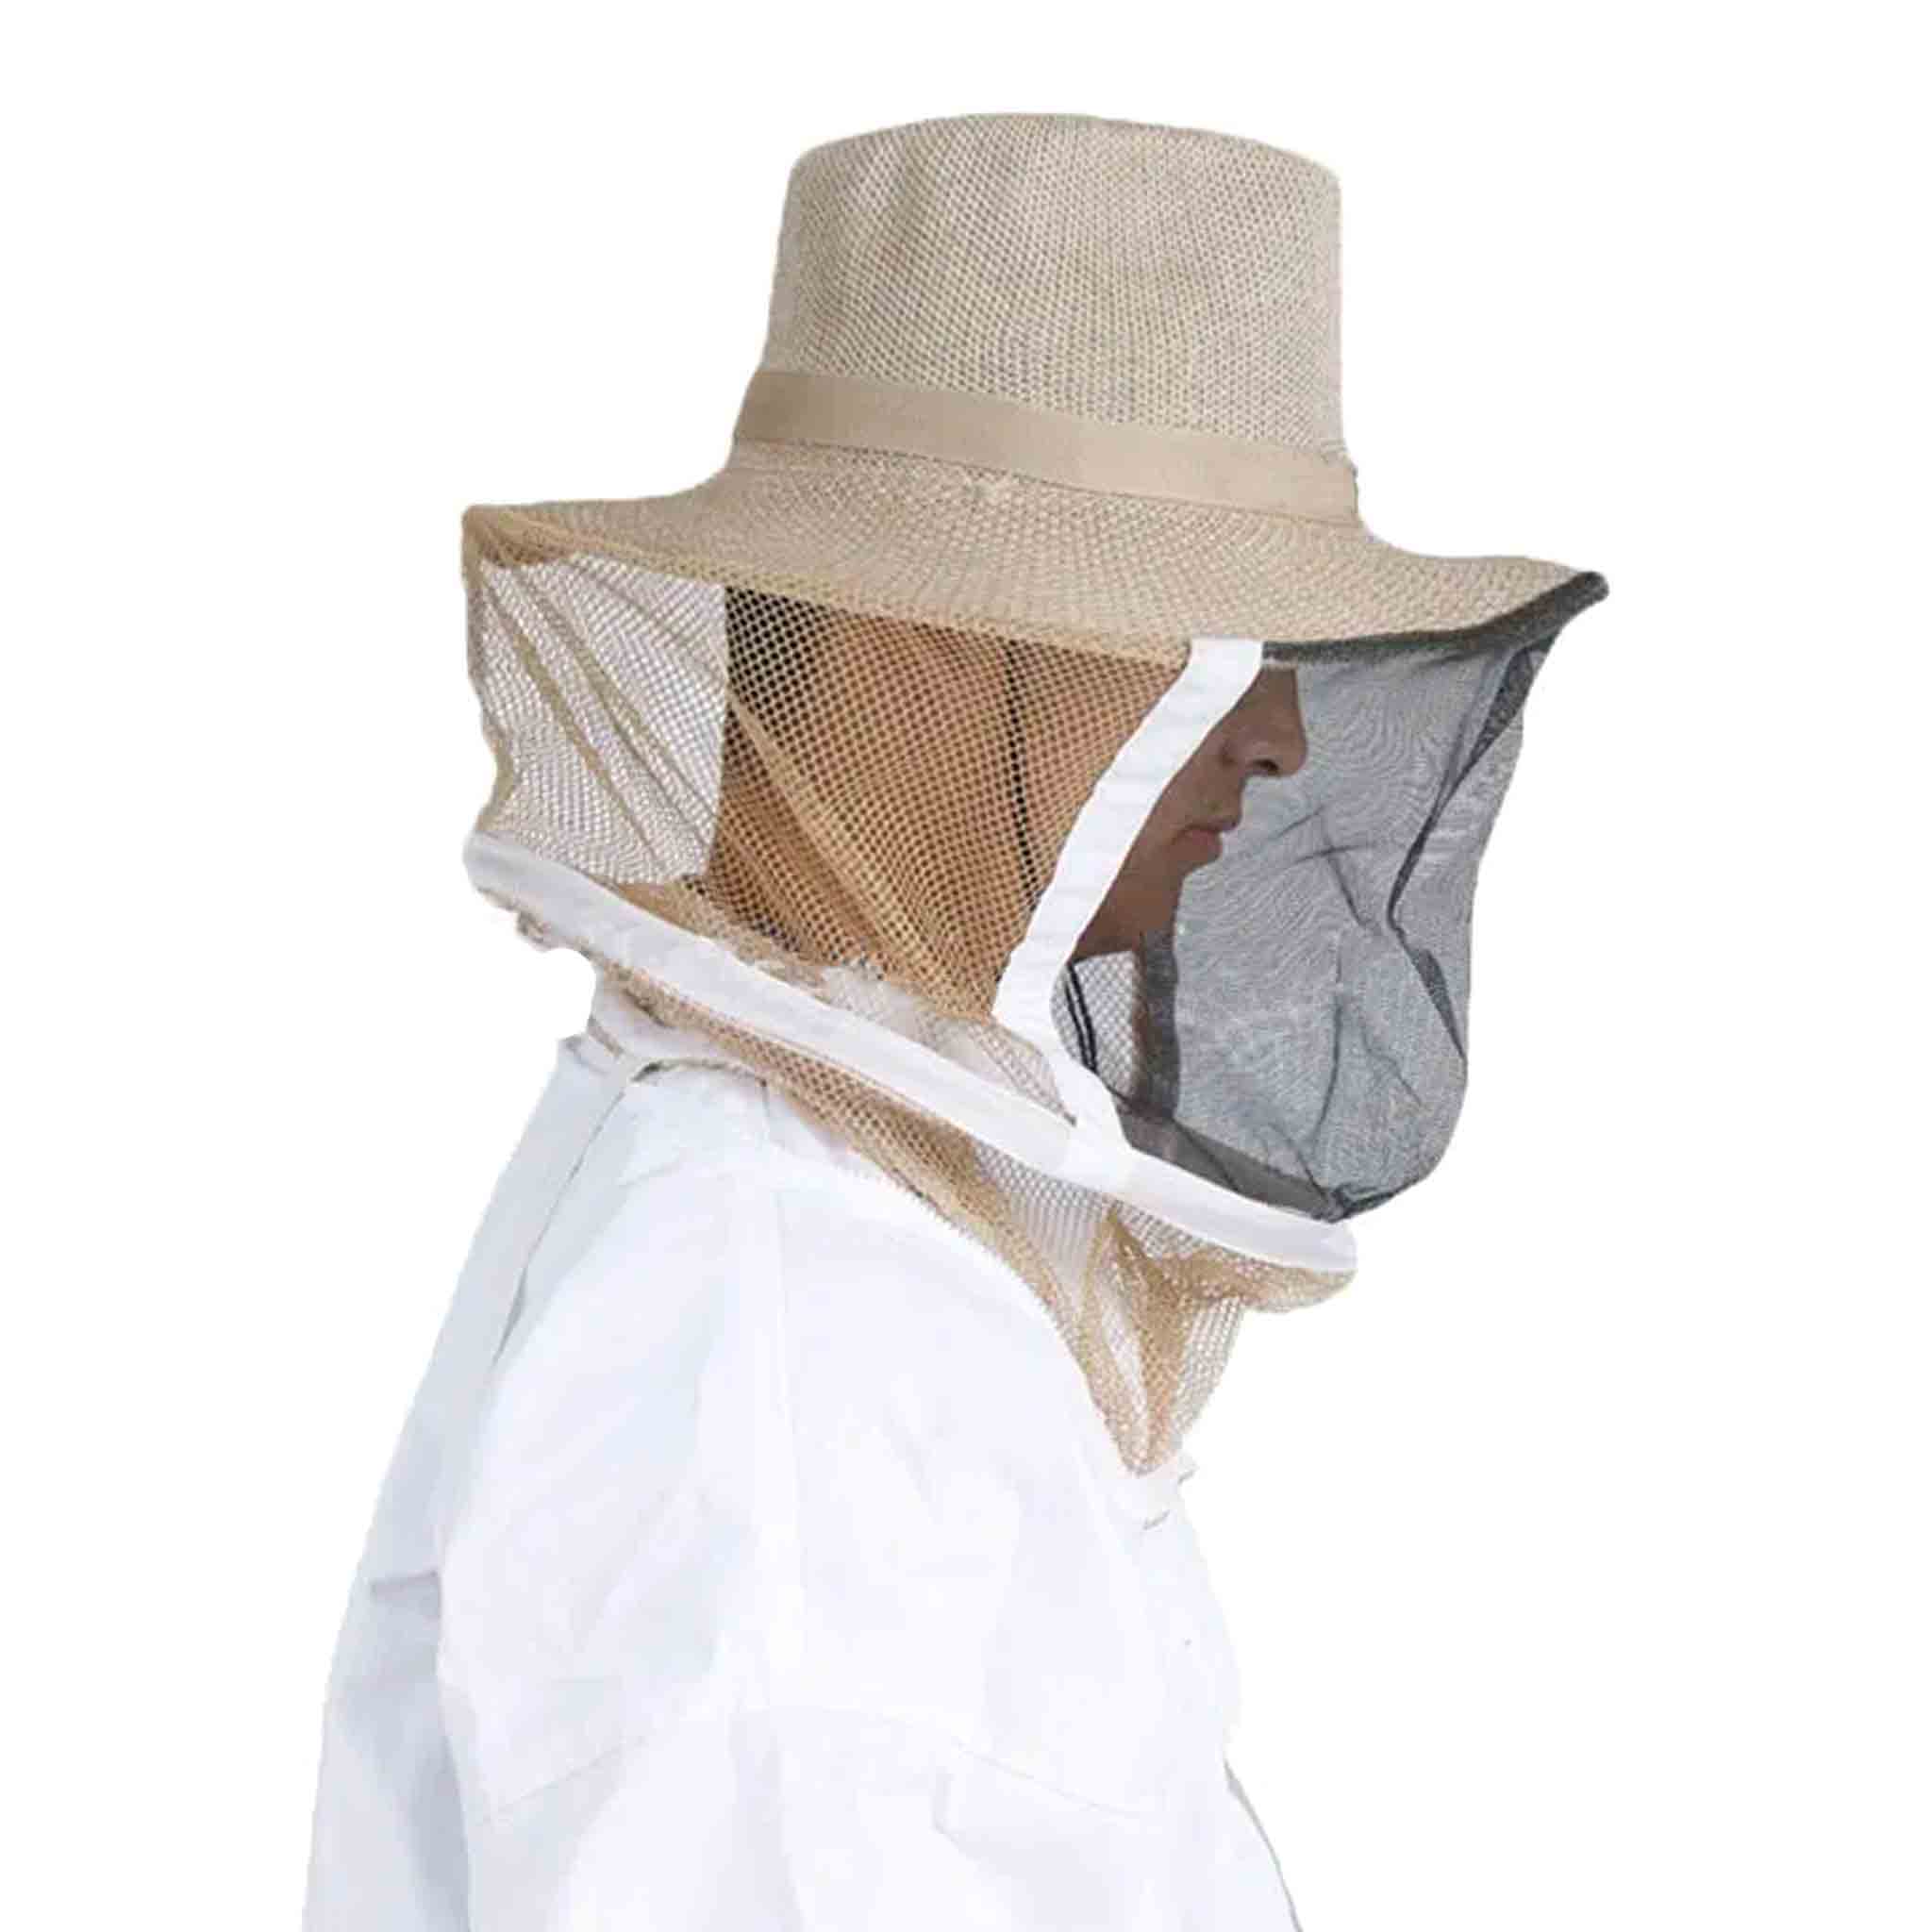 Beekeeping Round Hat and Veil with Strap under the Chin - Clothing collection by Buzzbee Beekeeping Supplies